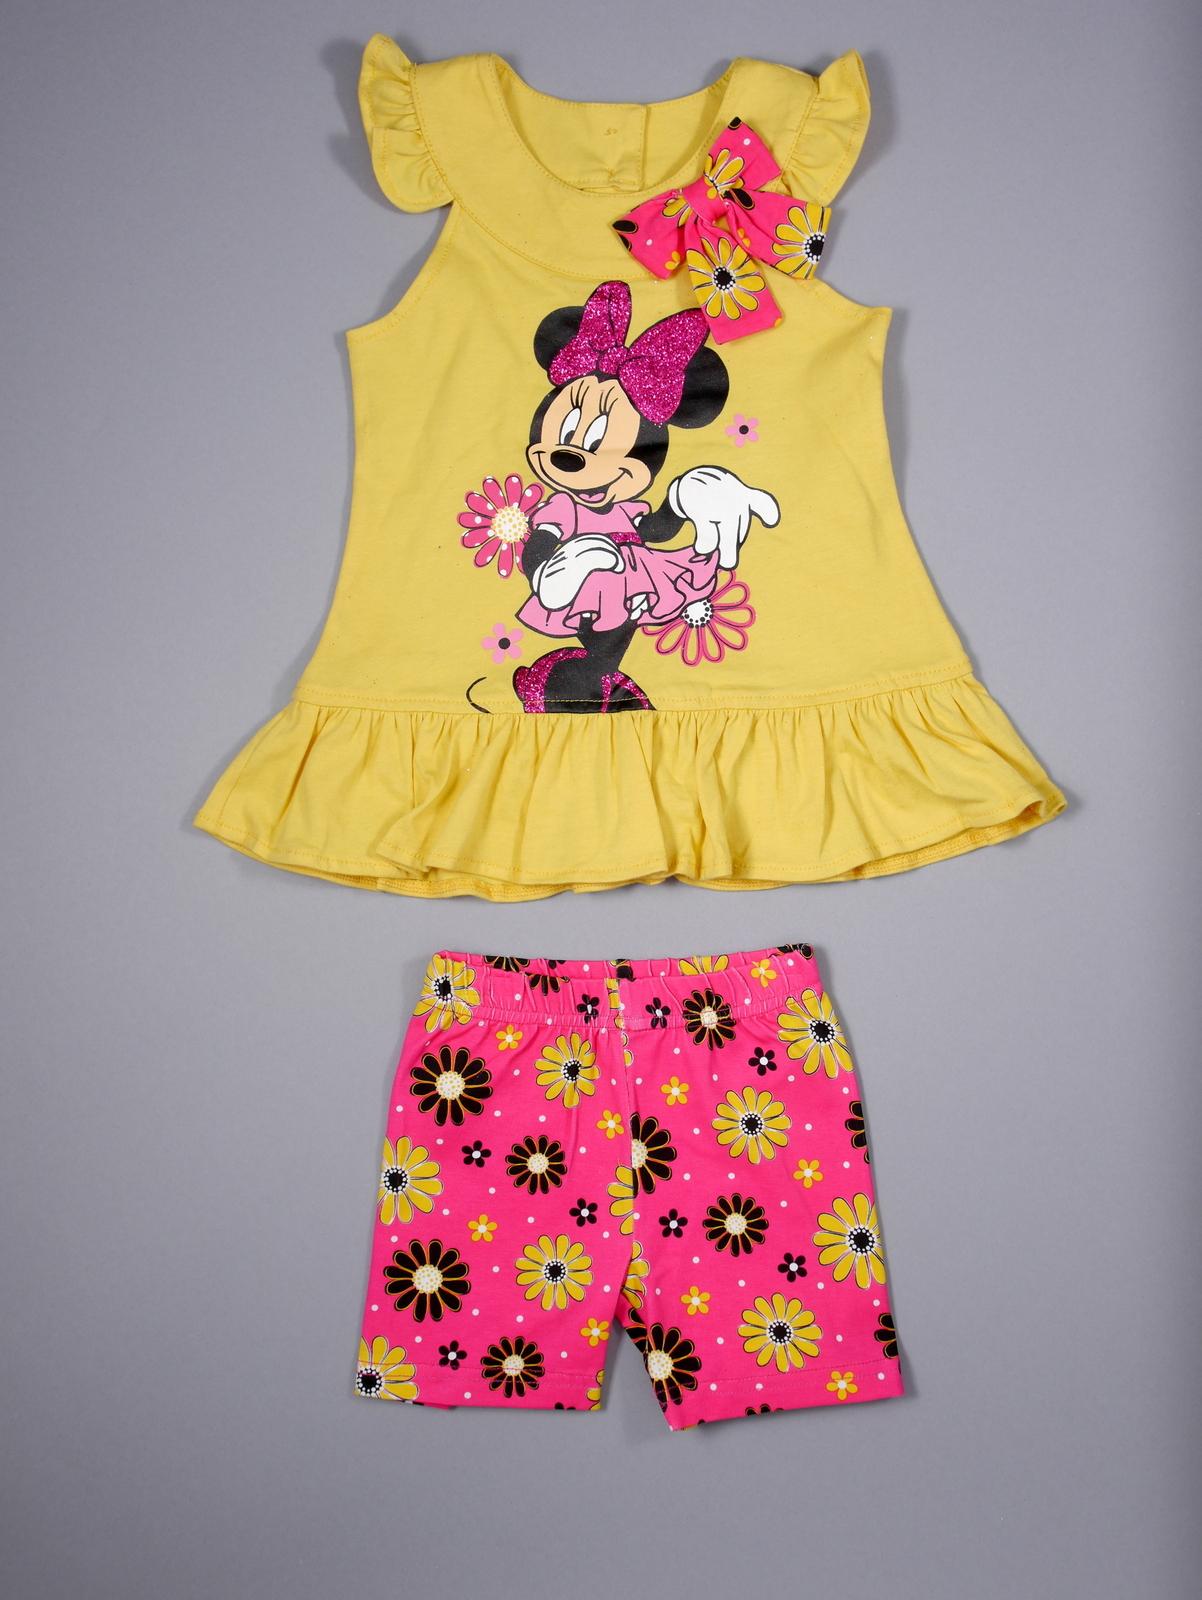 Disney Infant & Toddler Girl's Top & Shorts - Minnie Mouse